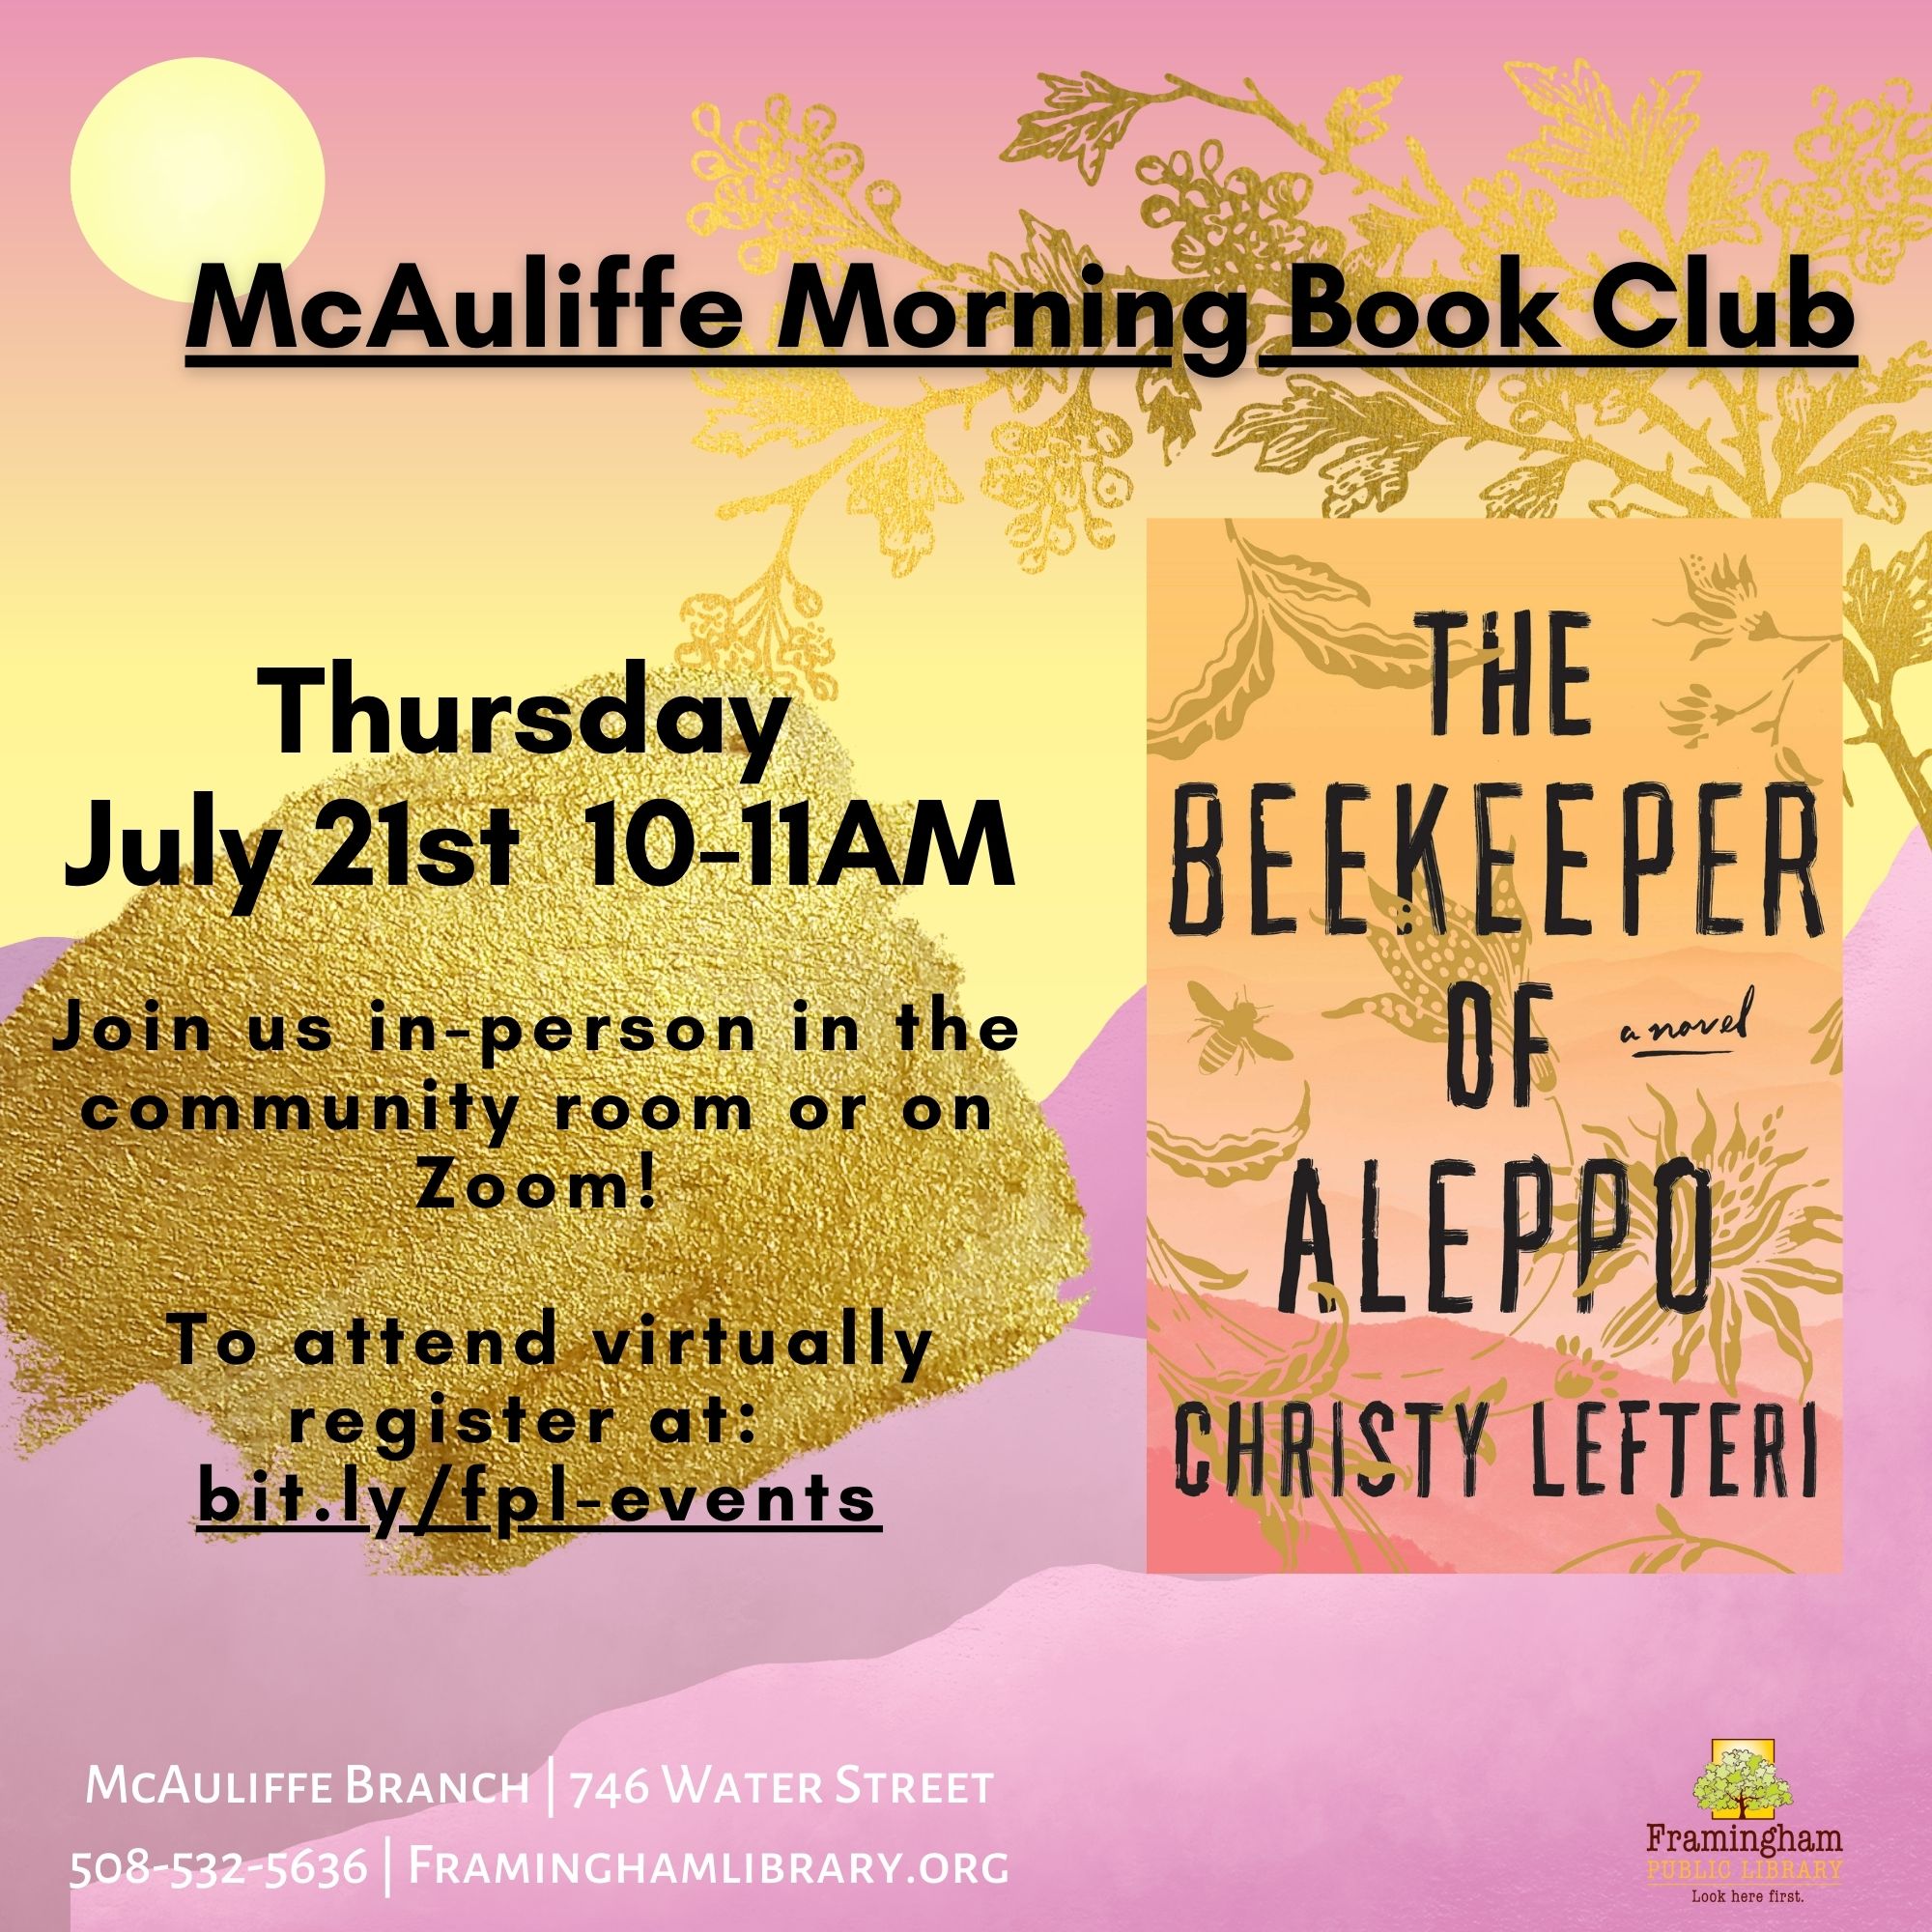 McAuliffe Morning Book Club: The Beekeeper of Aleppo by Christy Lefteri thumbnail Photo